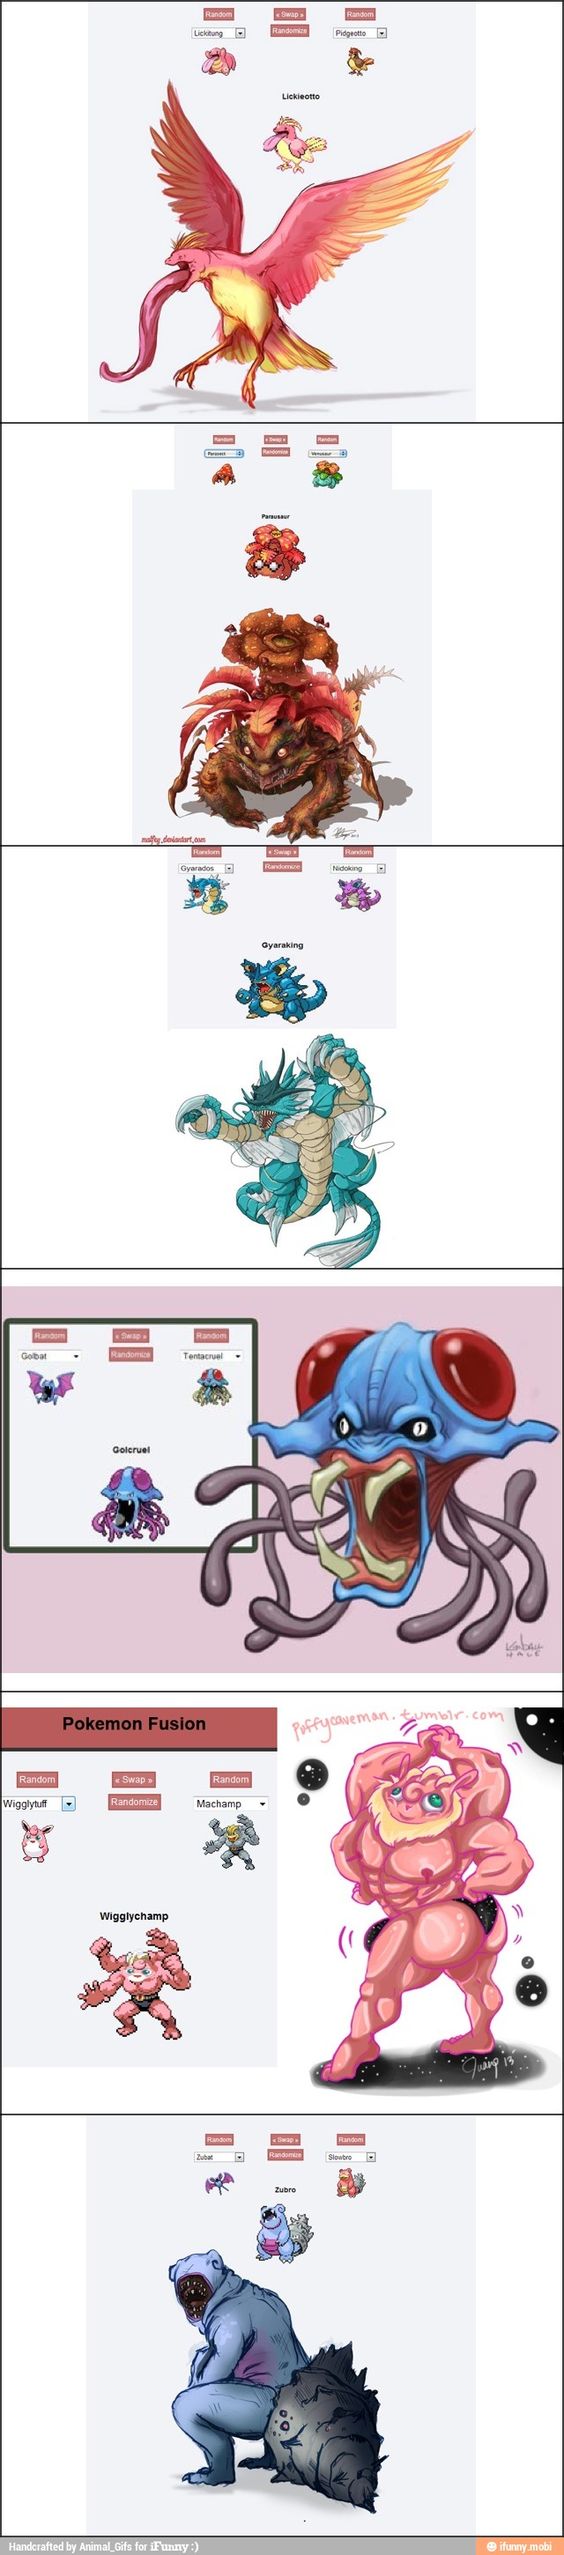 Pokemon fusion ((these are actually quite terrifying. especially wigglychamp))